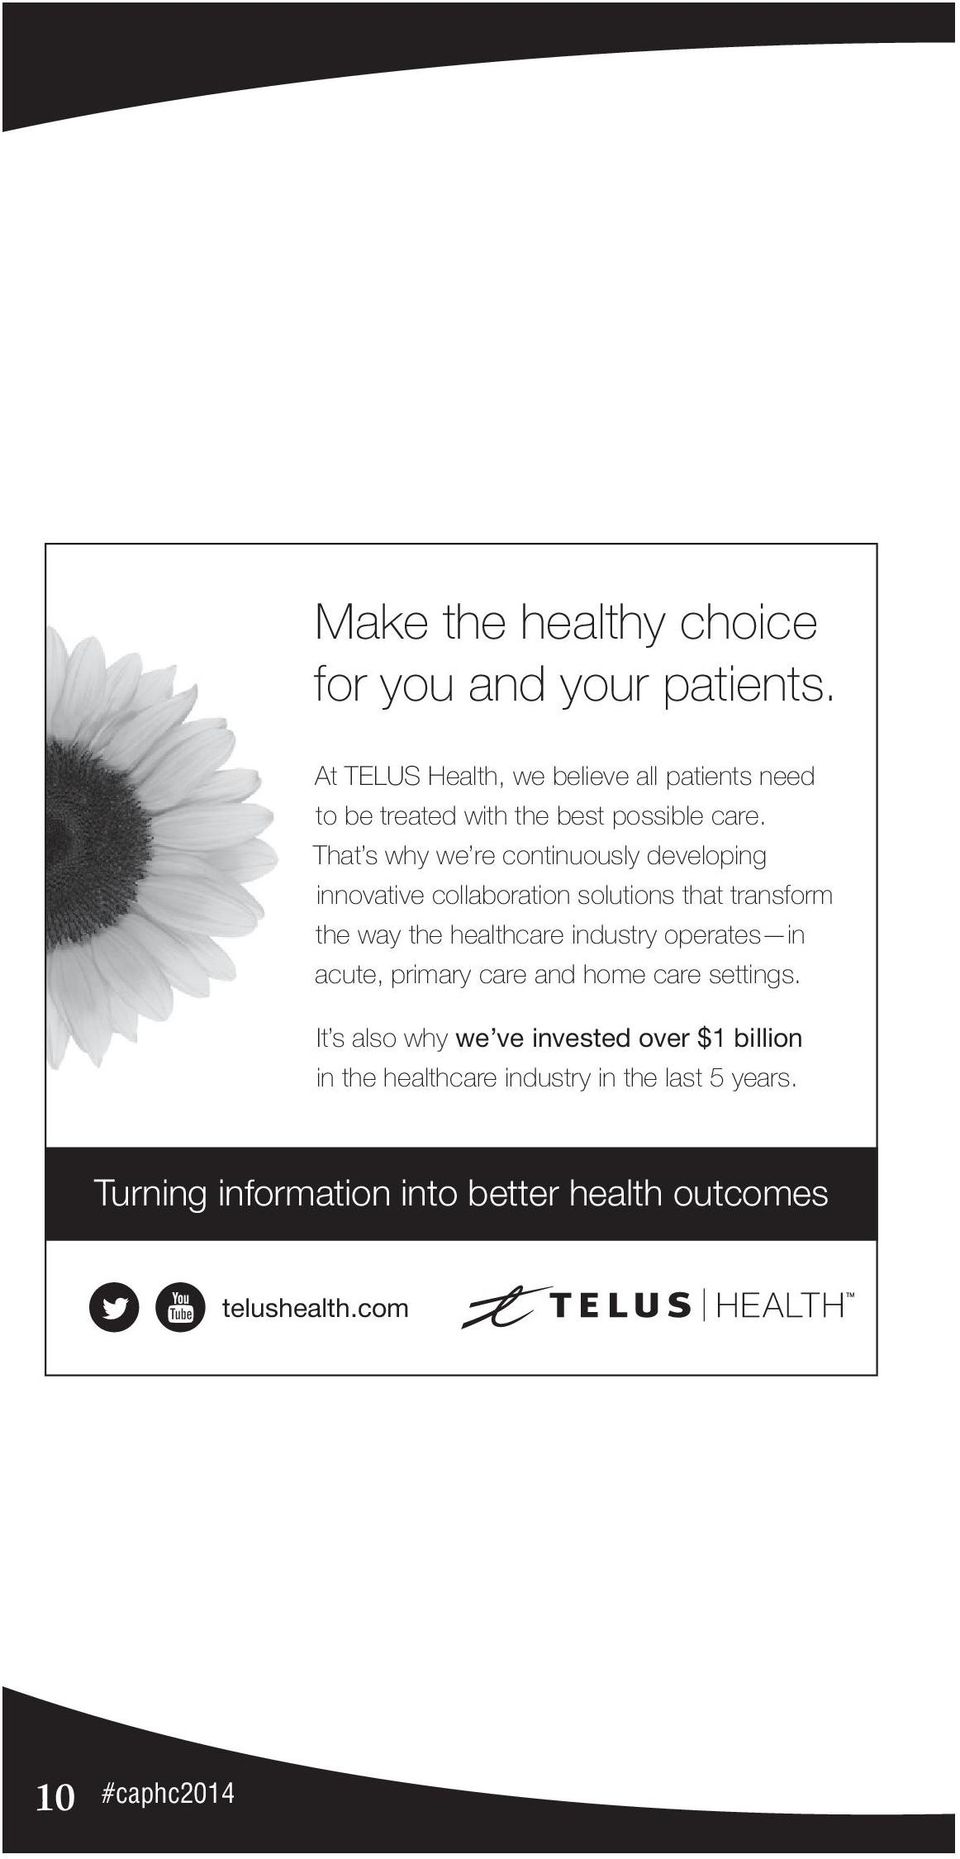 It s also why we ve invested over $1 billion in the healthcare industry in the last 5 years. Turning information into better health outcomes telushealth.